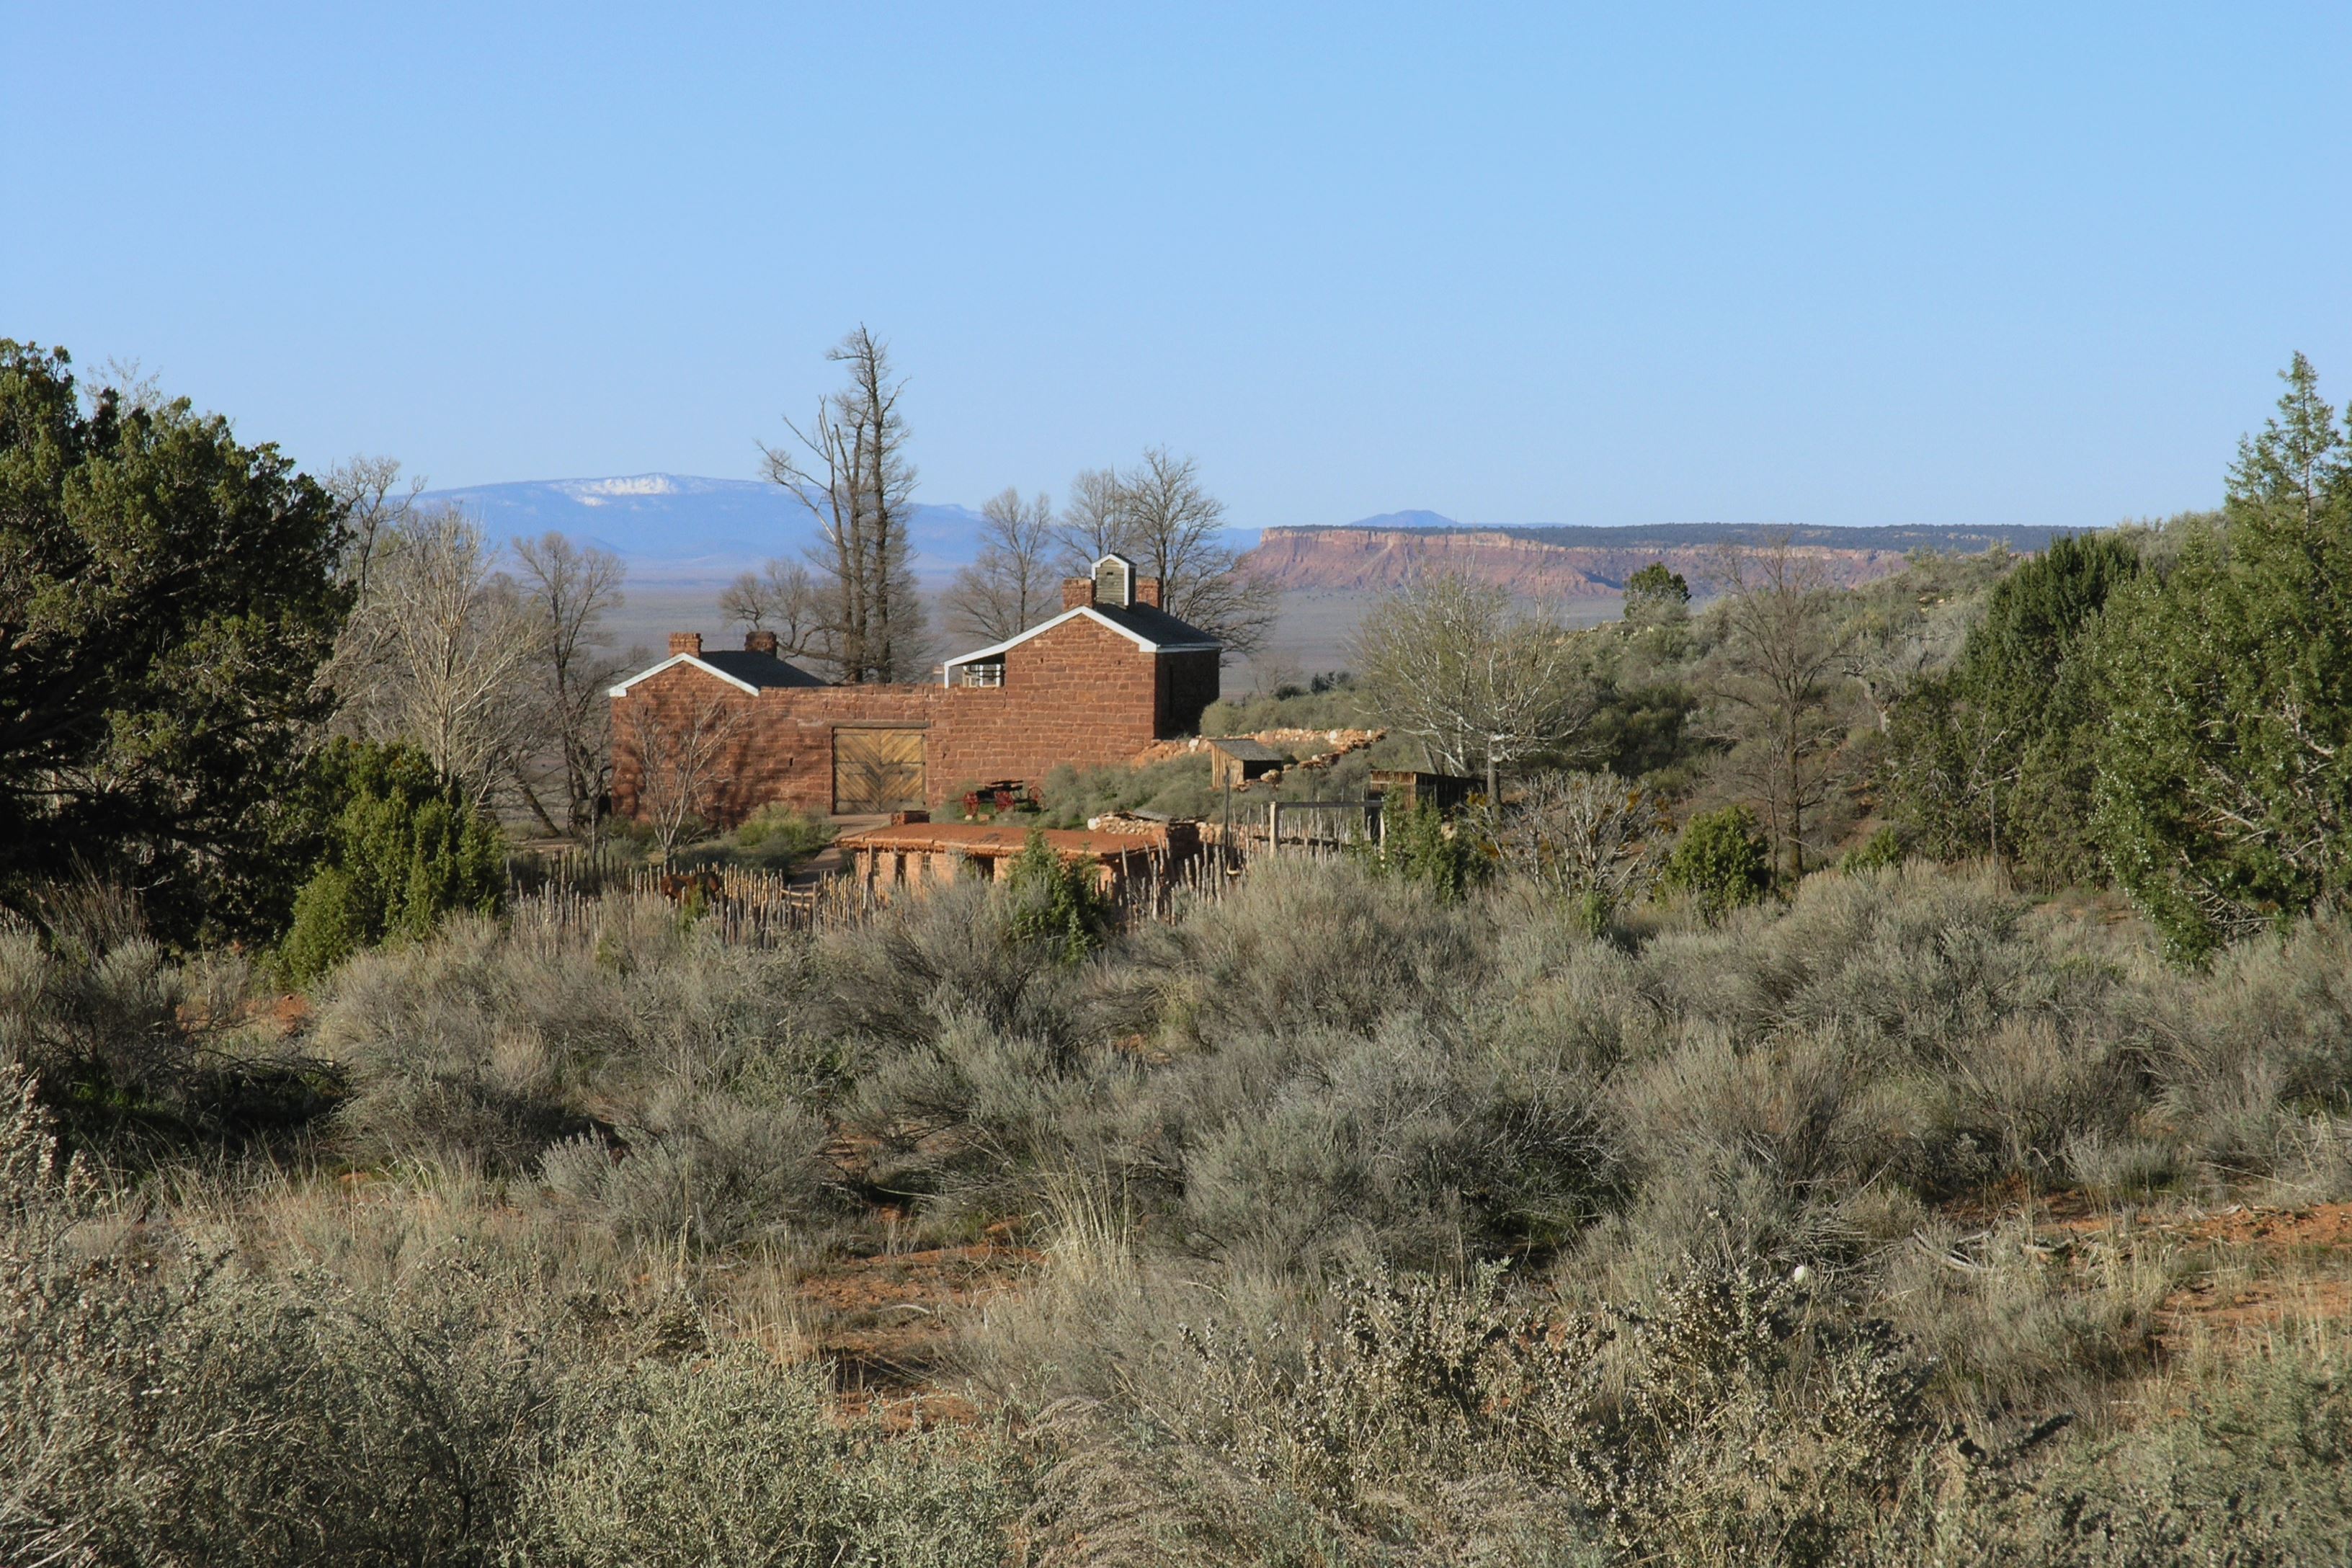 A sandstone fort rests between desert scrub in the foreground and a mountain in the distance.